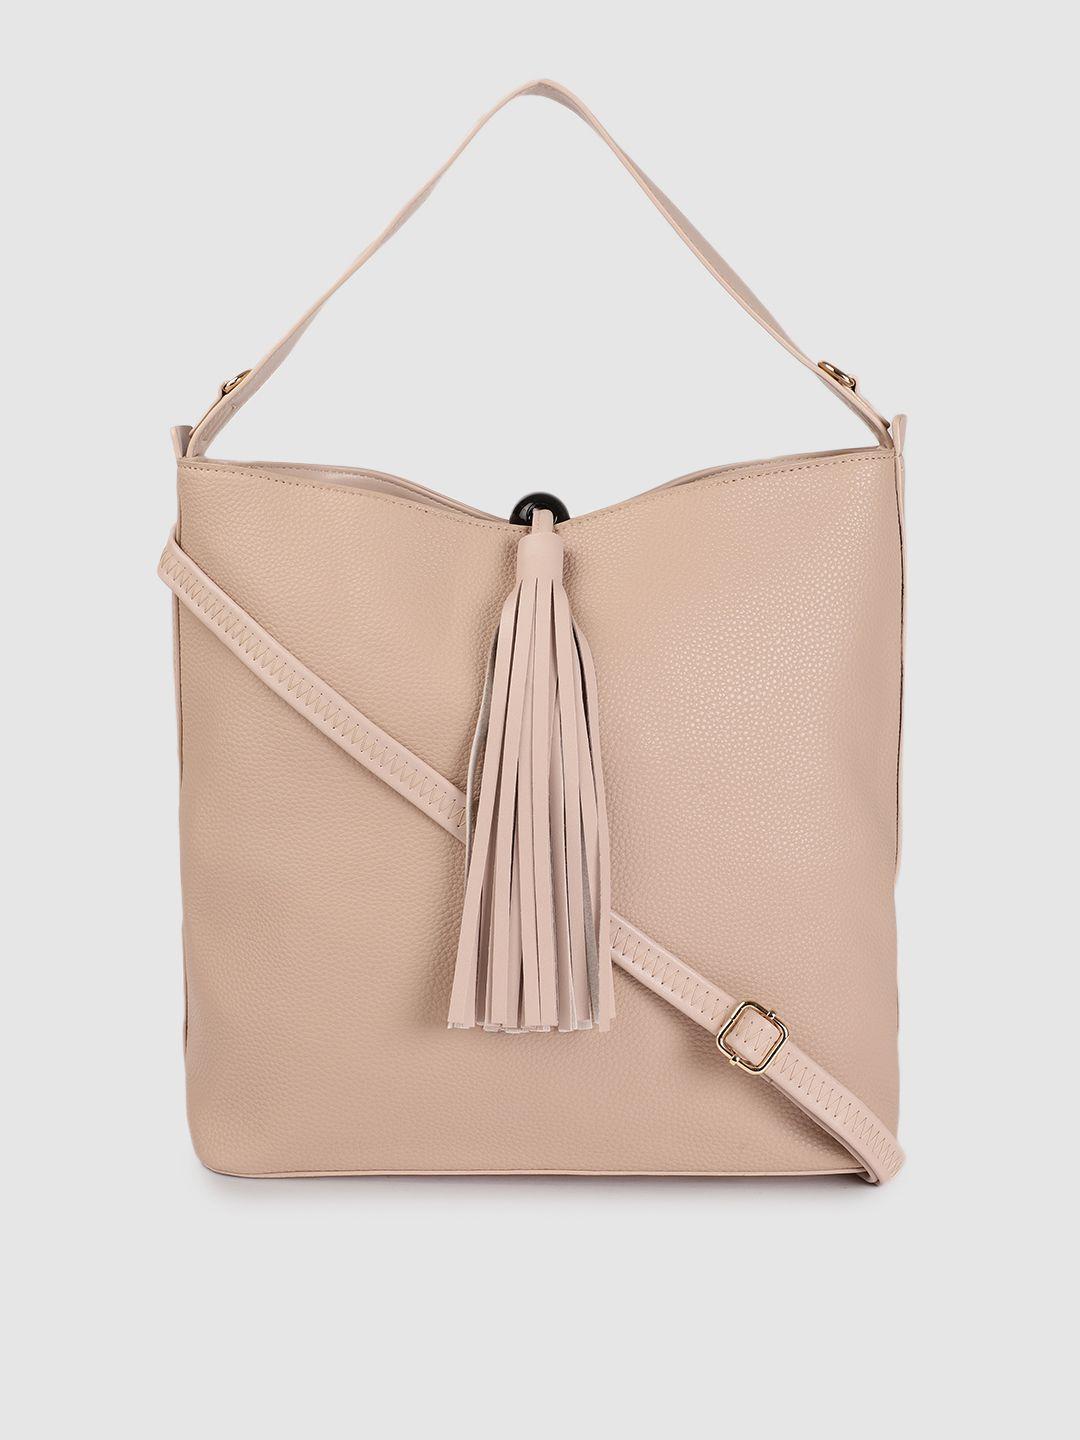 caprese nude-coloured animal textured regular structured hobo bag with fringed detail